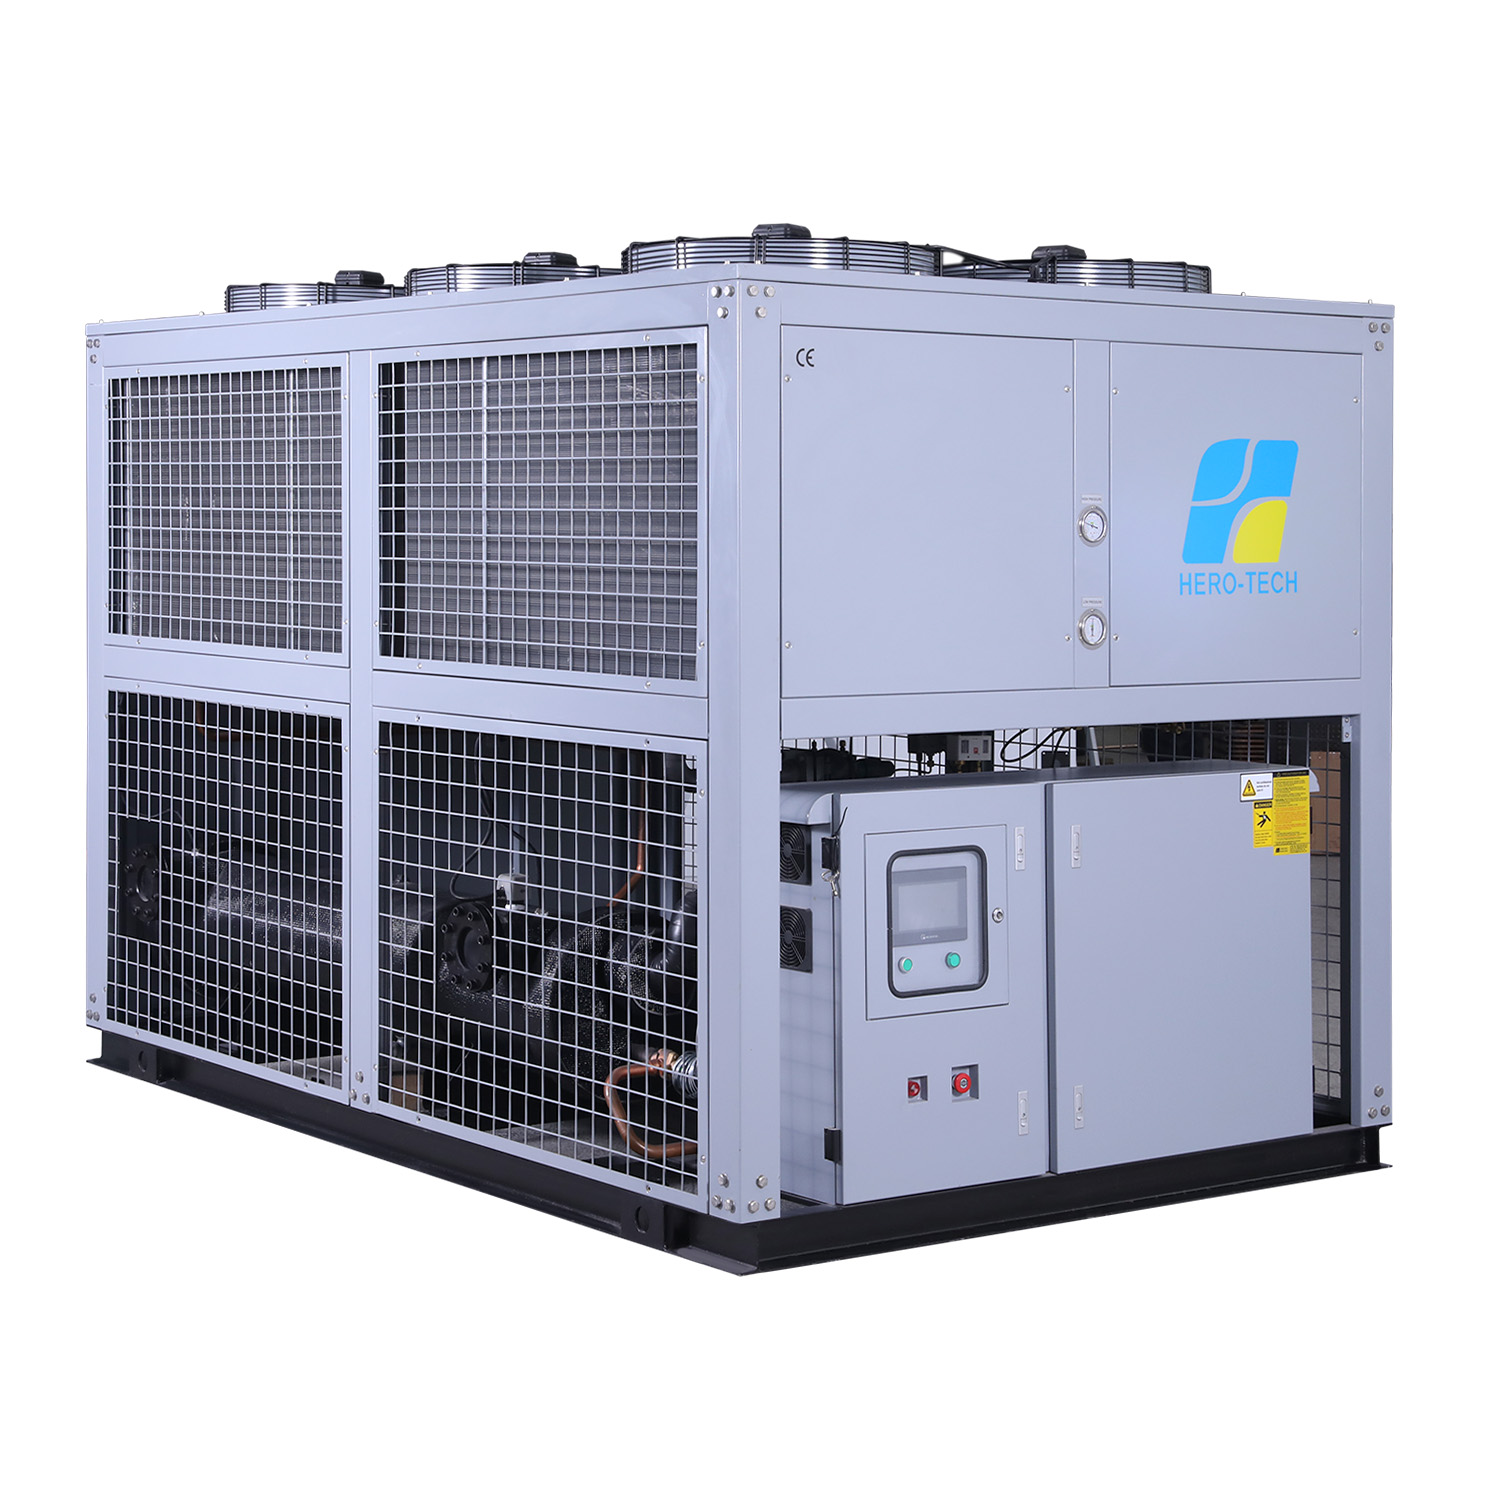 //m.tumblinghills.com/air-cooled-screw-type-chiller.html